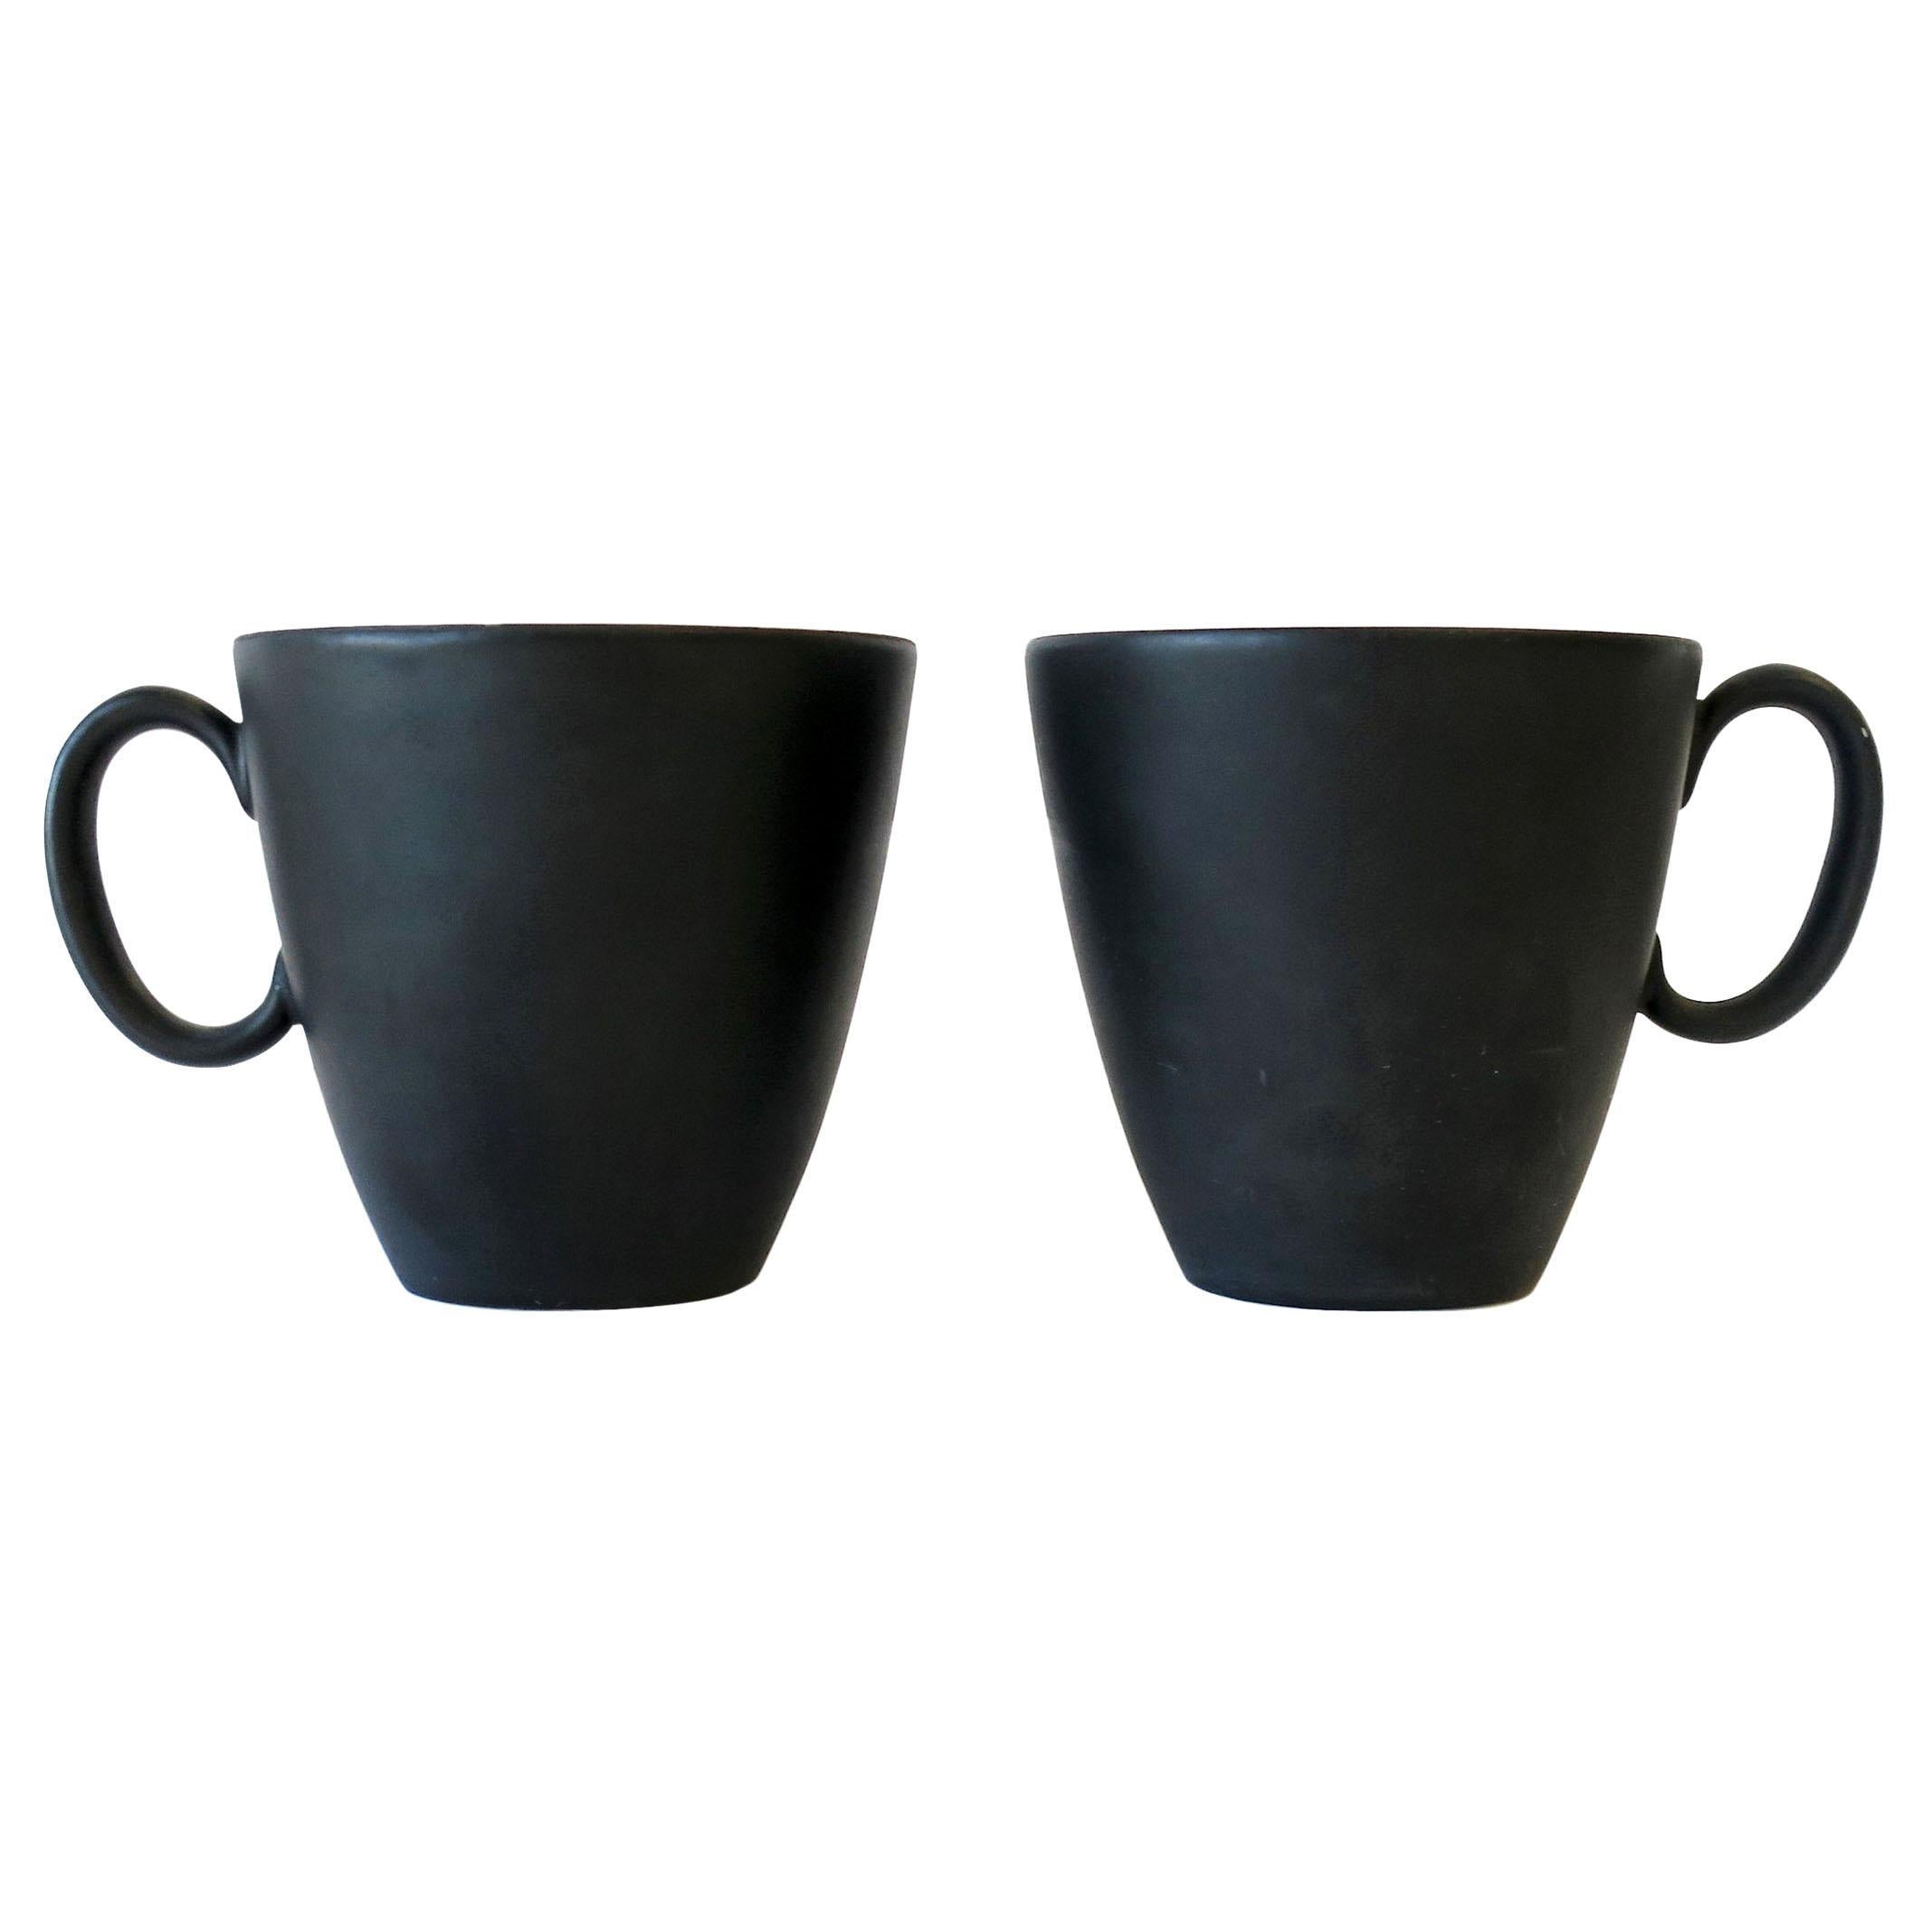 Designer Matte Black and White Espresso Coffee or Tea Demitasse Cup by Ray Loewy